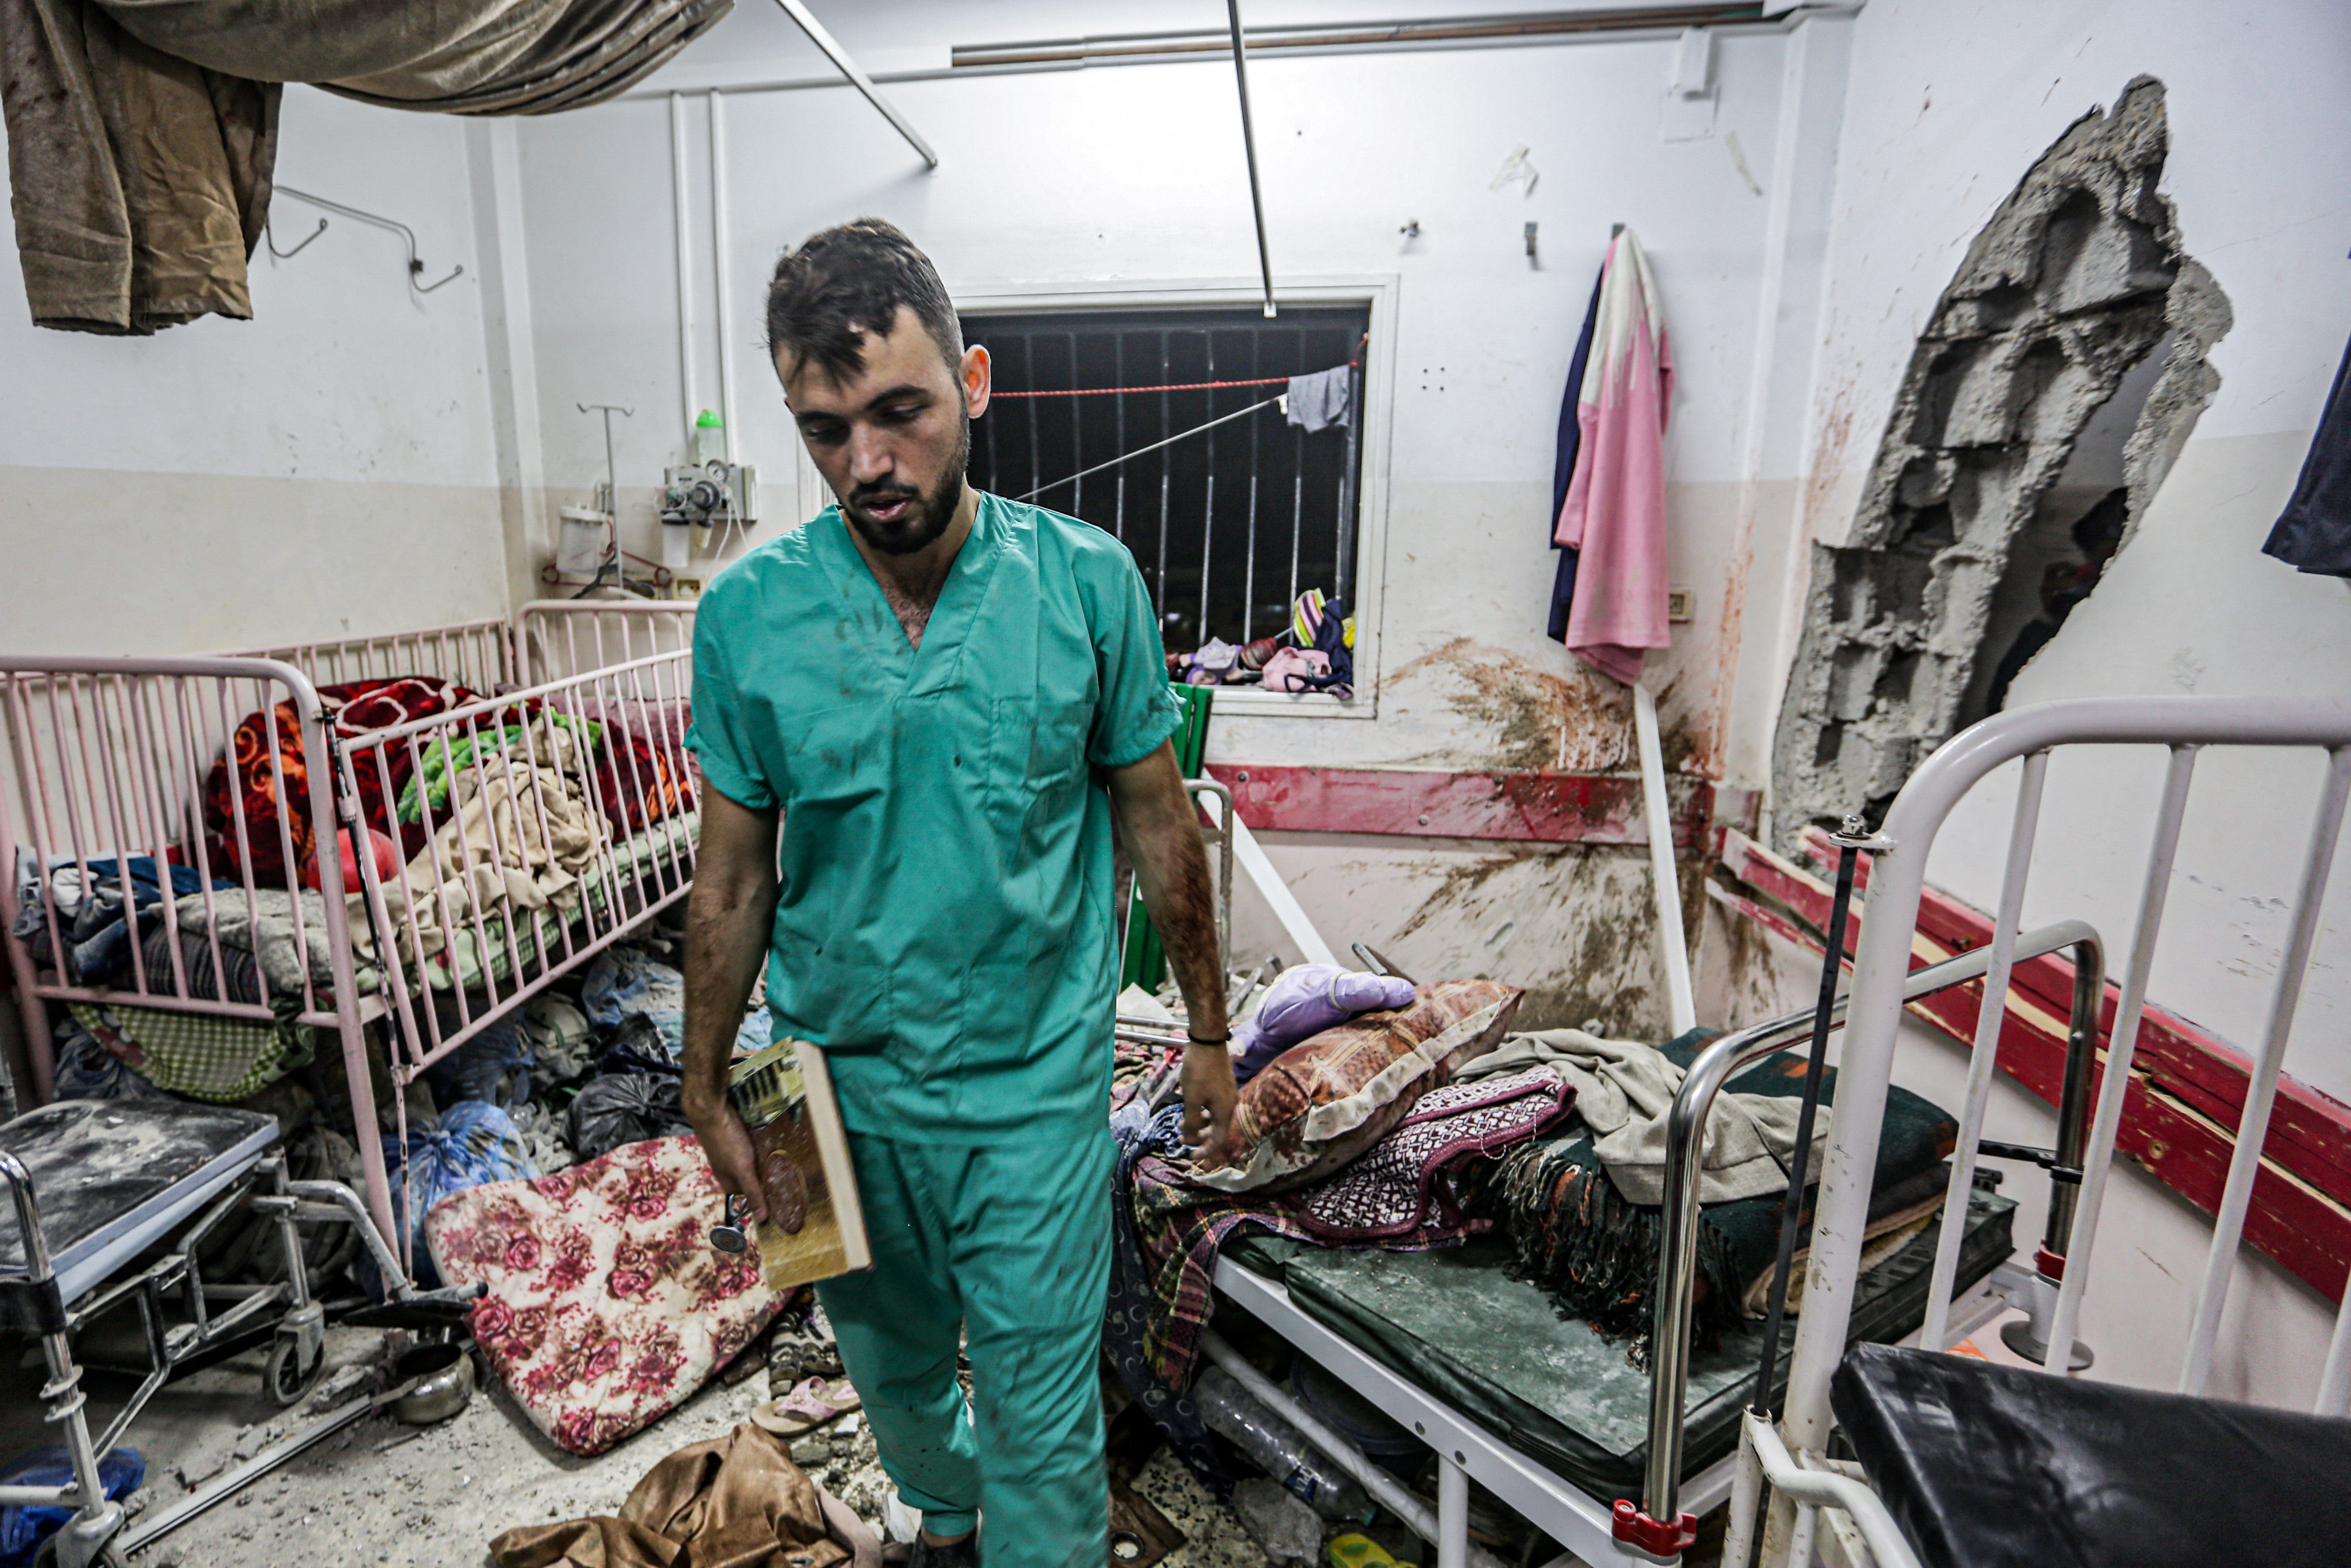 A man inspects the damage in a room following Israeli bombardment at Nasser hospital in Khan Yunis